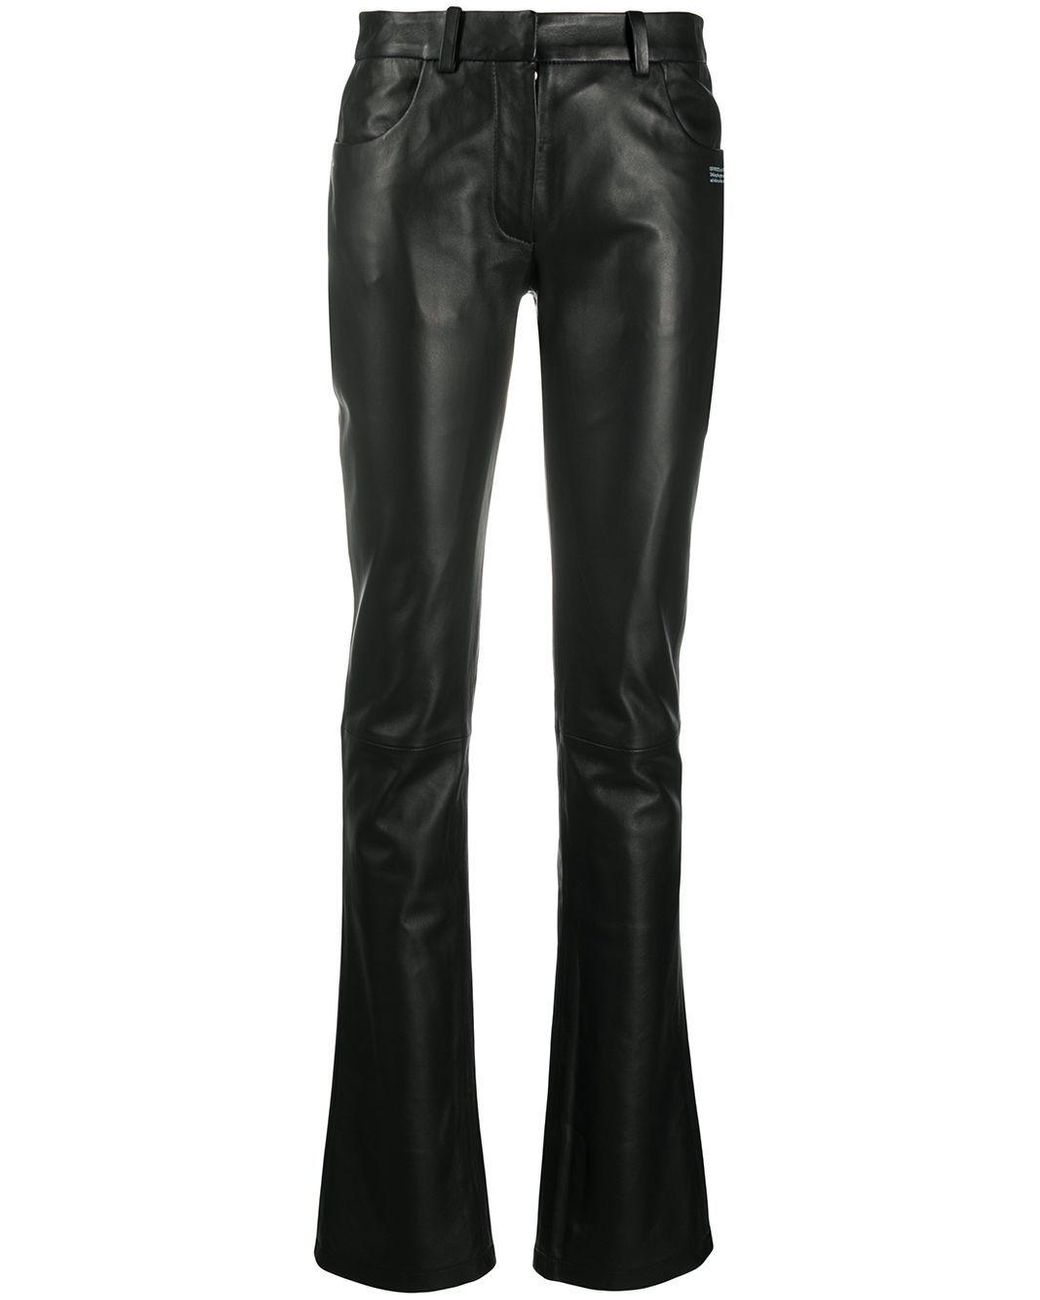 Off-White c/o Virgil Abloh Flared Leather Trousers in Black - Lyst